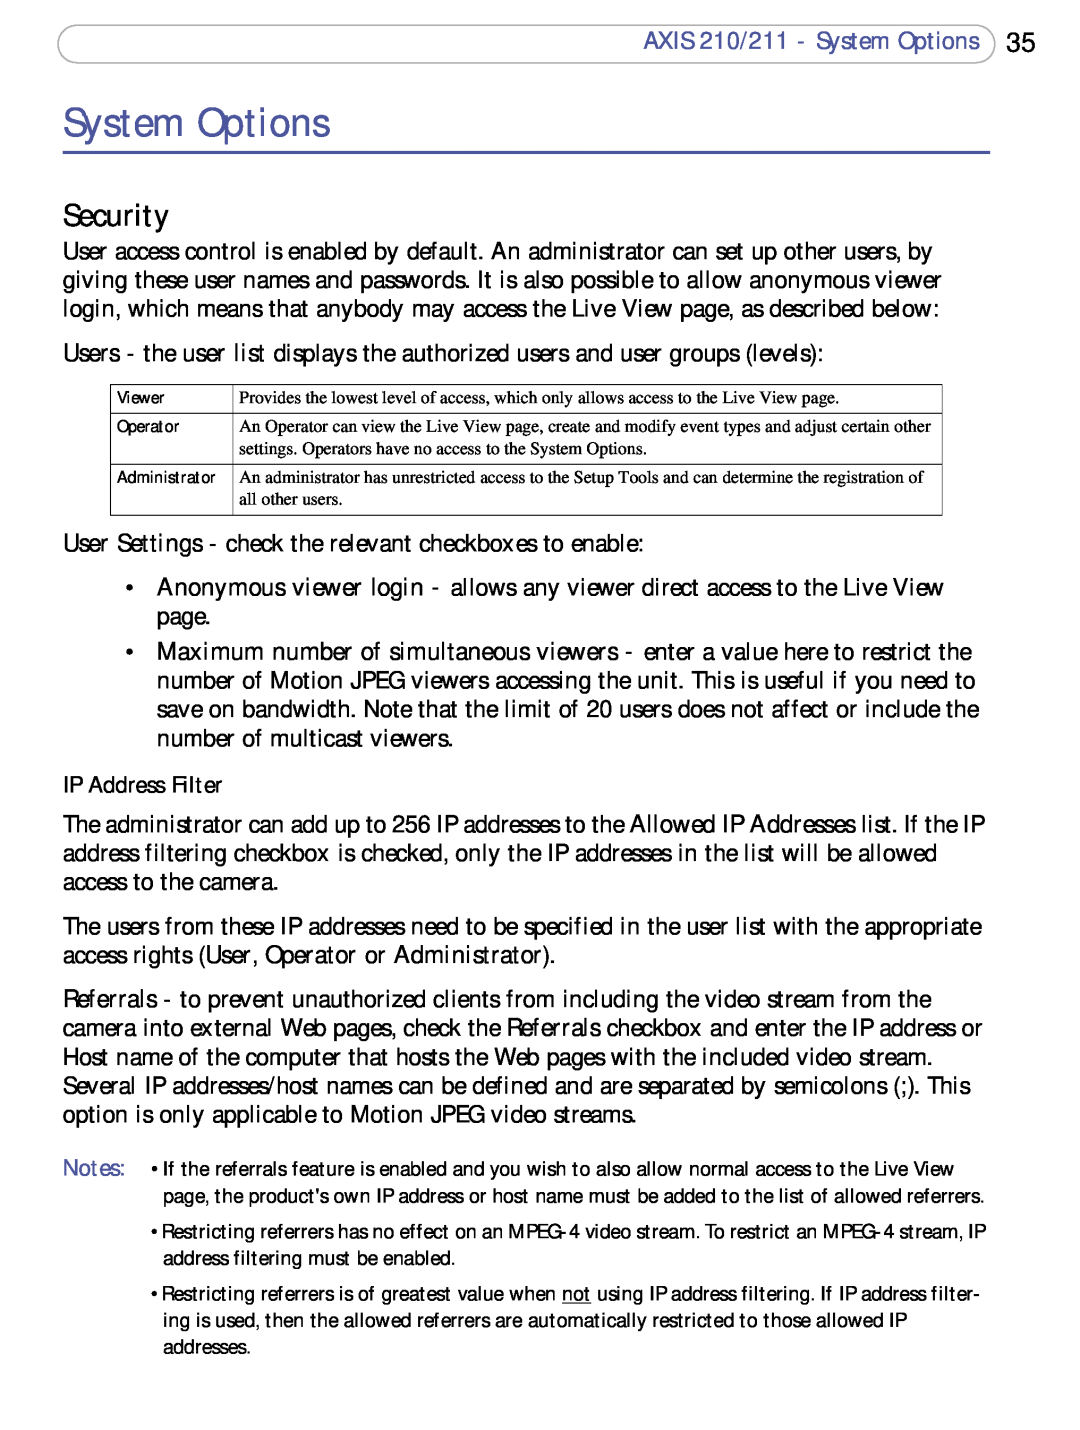 Axis Communications user manual Security, AXIS 210/211 - System Options, IP Address Filter 